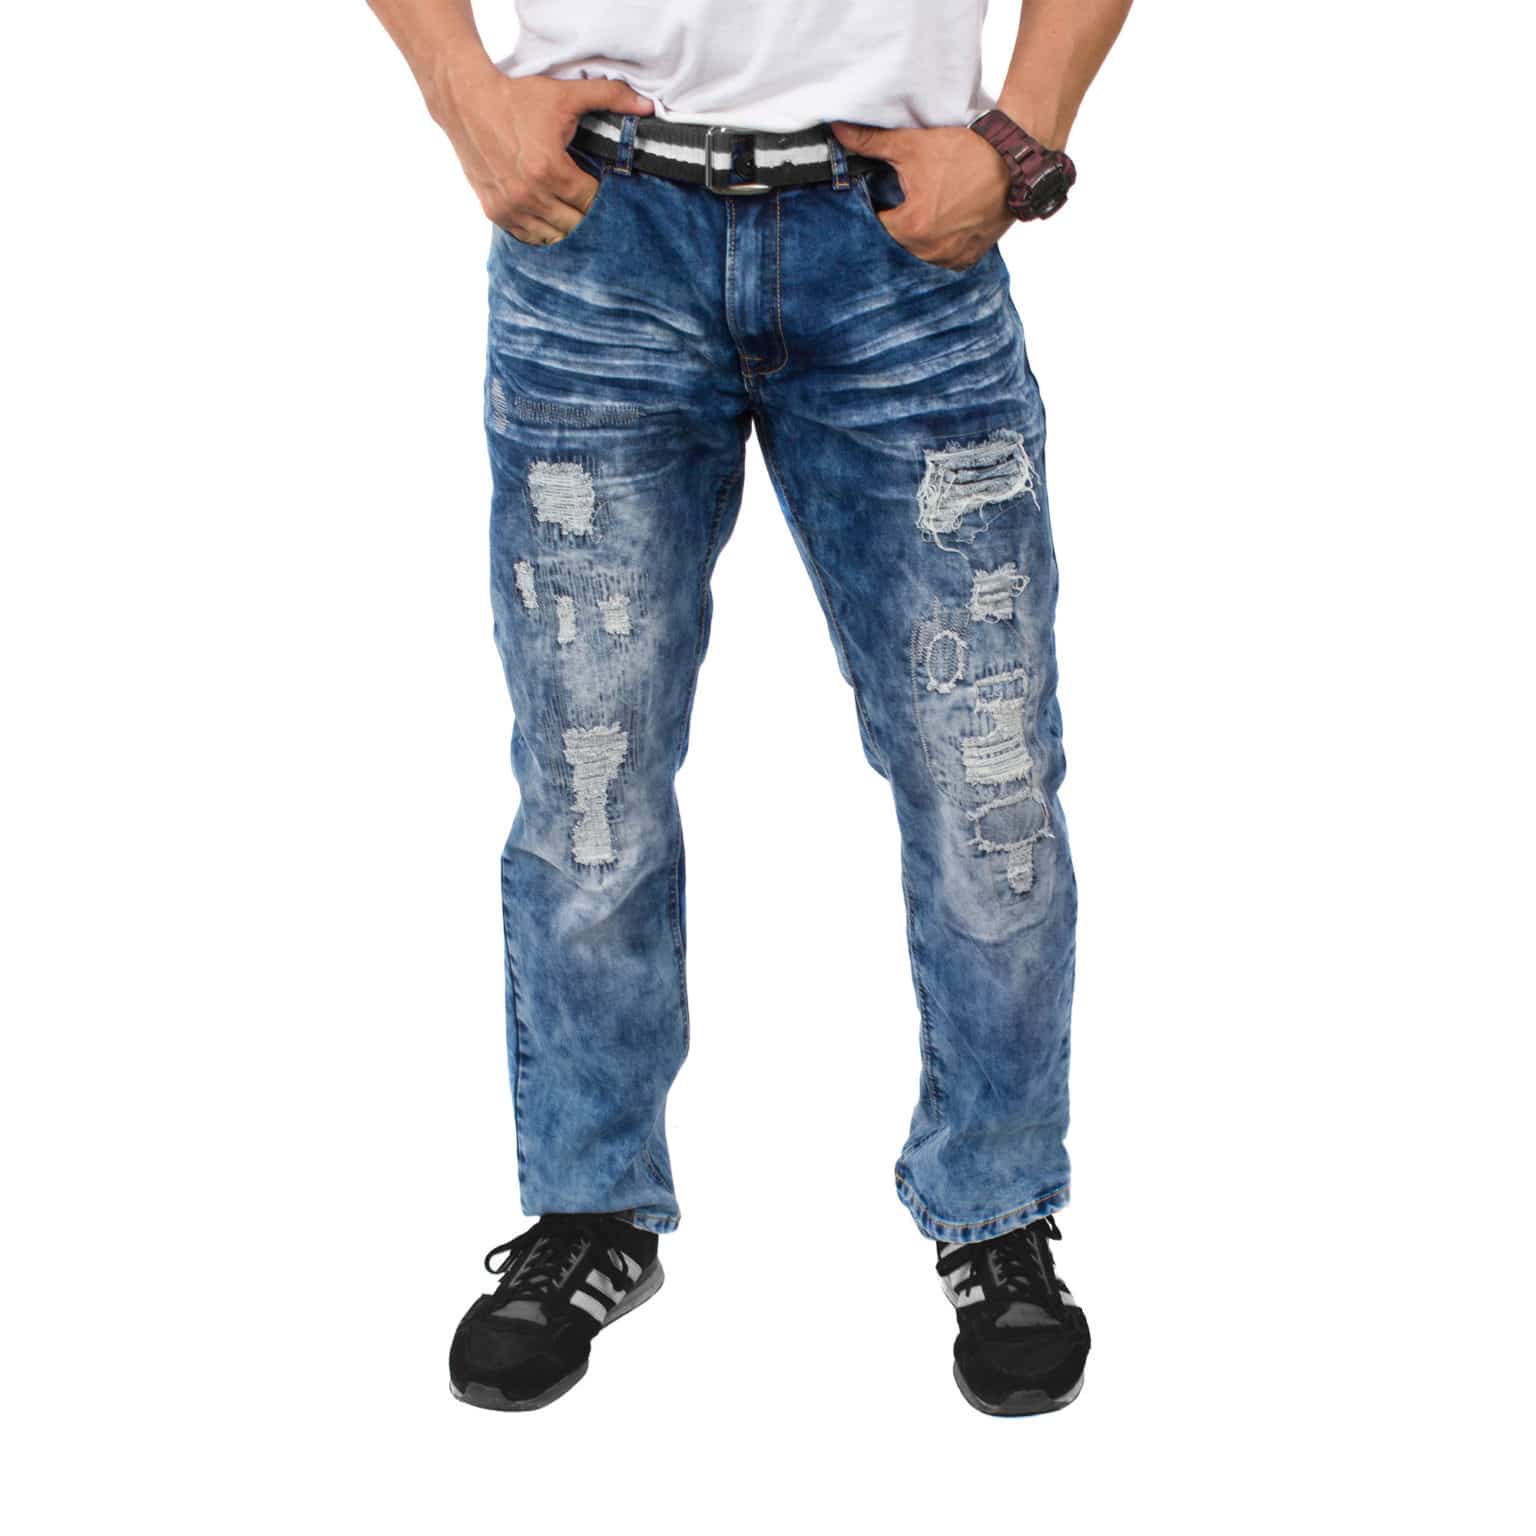 Brooklyn Laundry Blue Ripped Distressed Denim, Slim Fit Jeans for Men ...